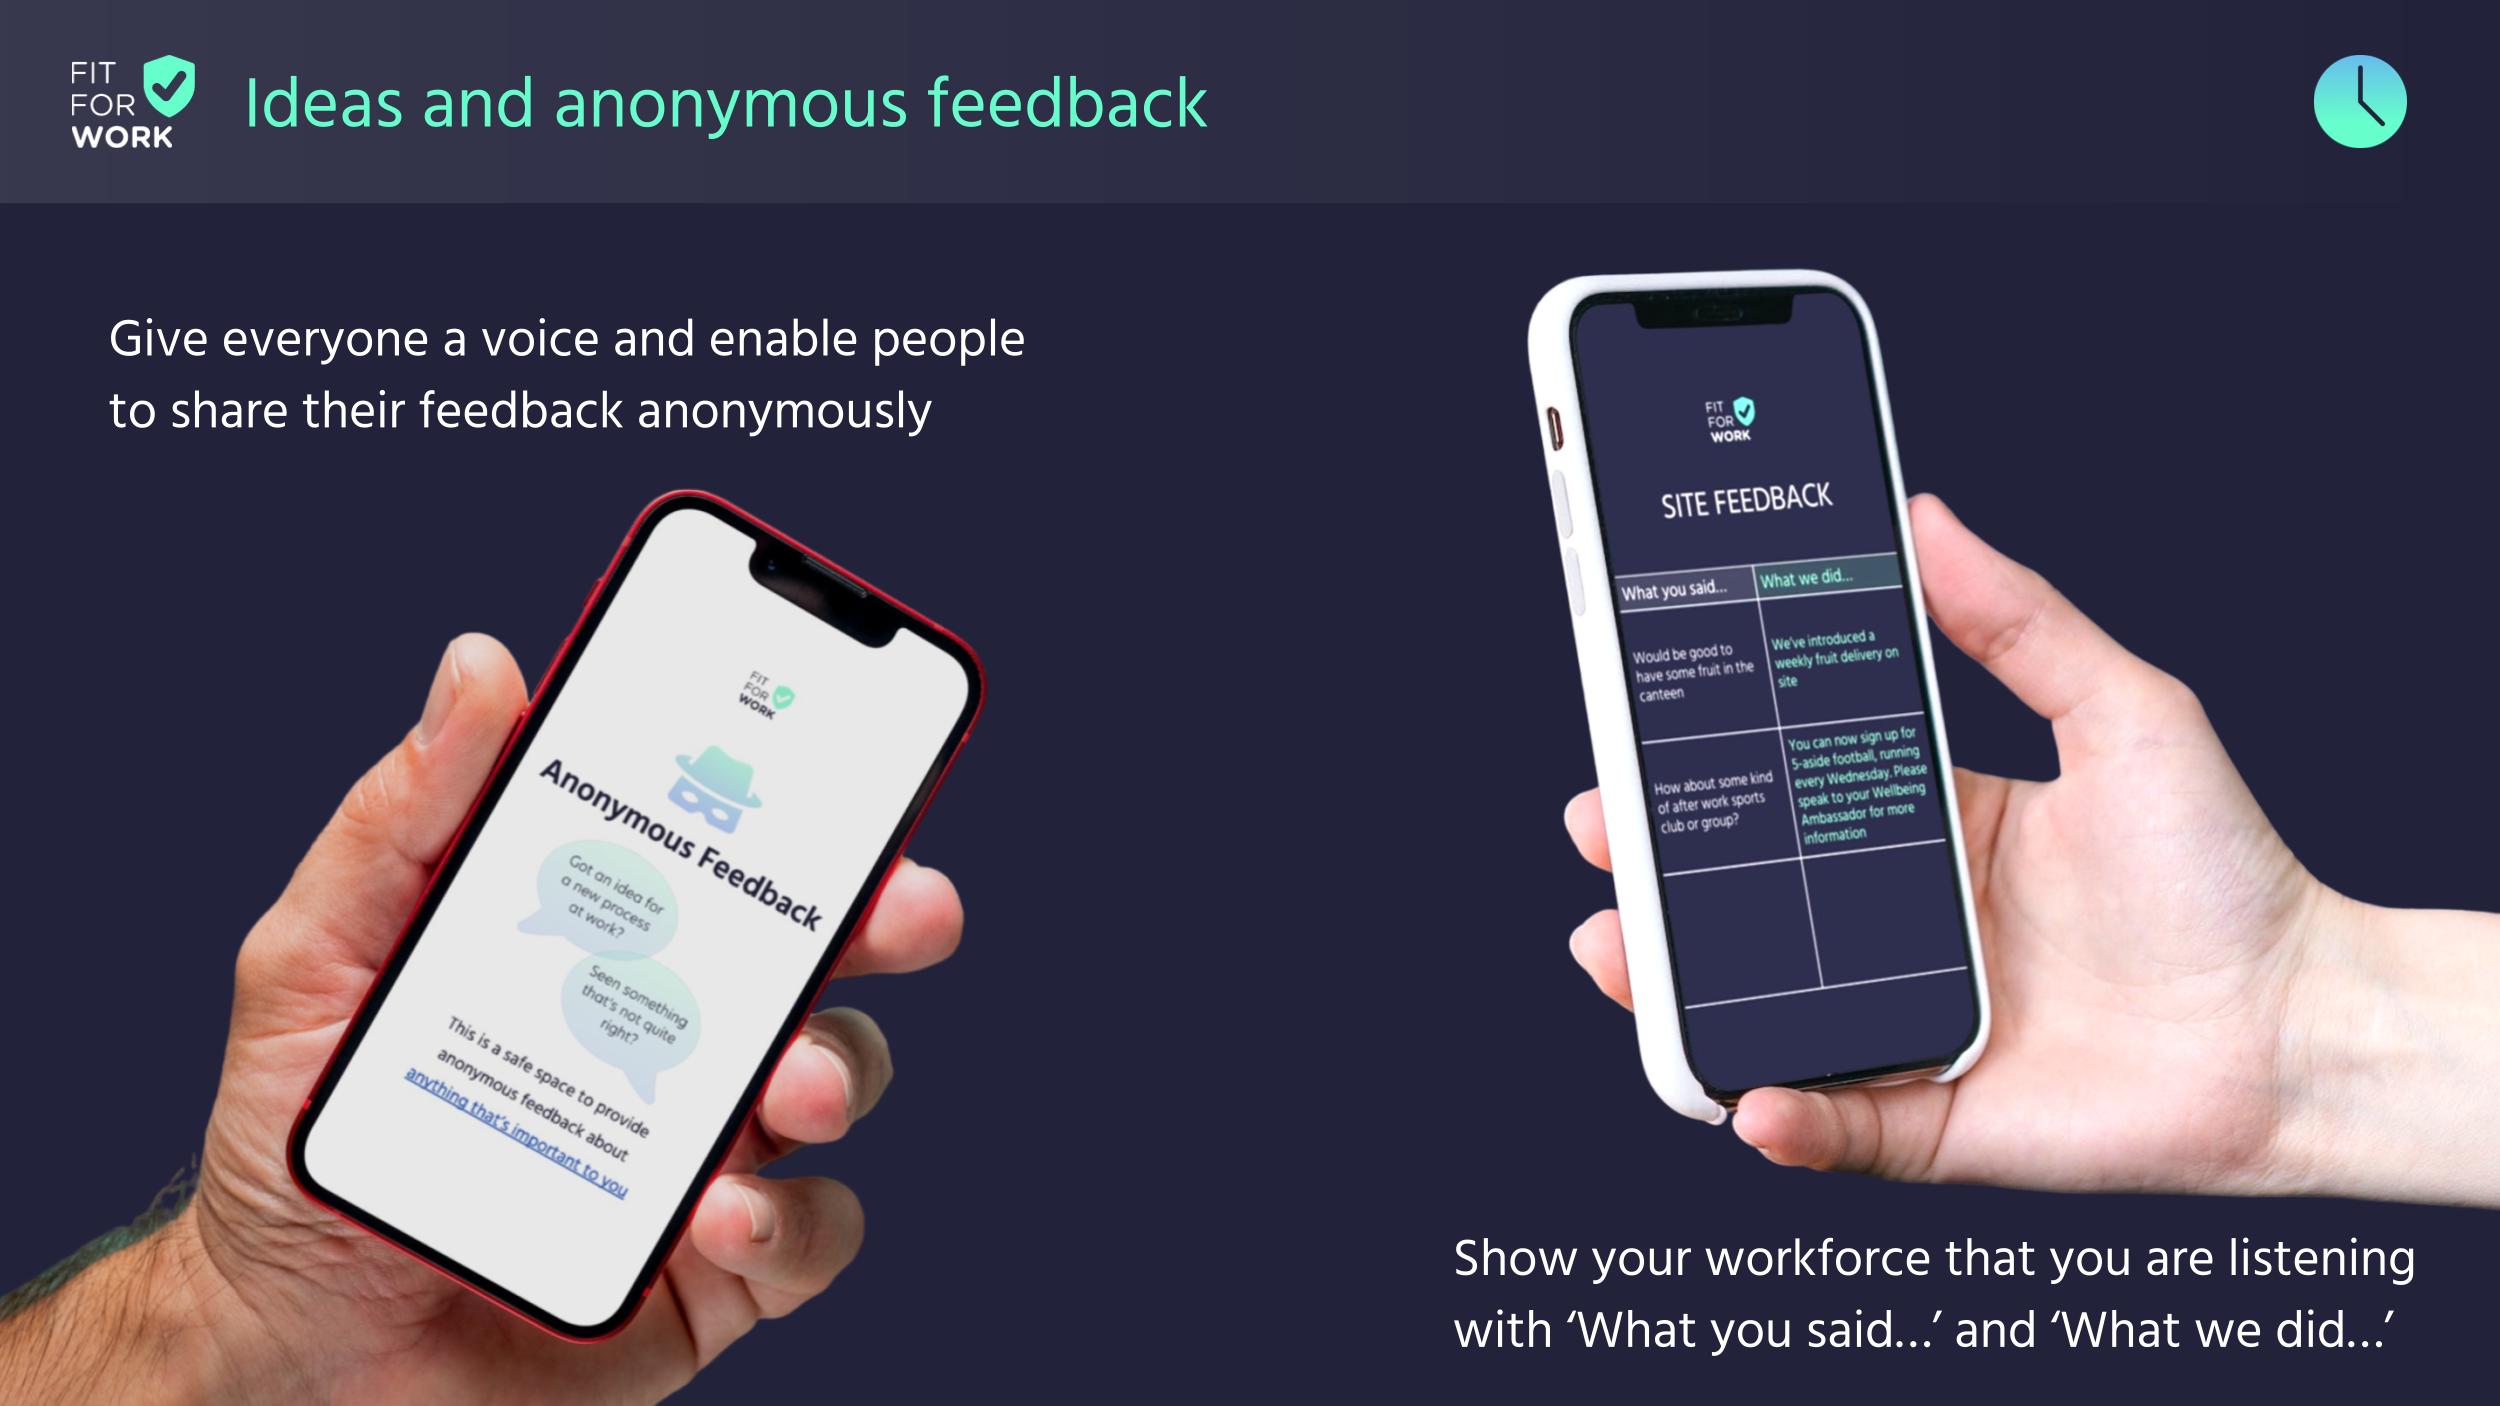 The Fit for Work app allows for anonymity when reporting near misses or other safety knowledge without the risk of being victimised
Health Safety and Wellbeing